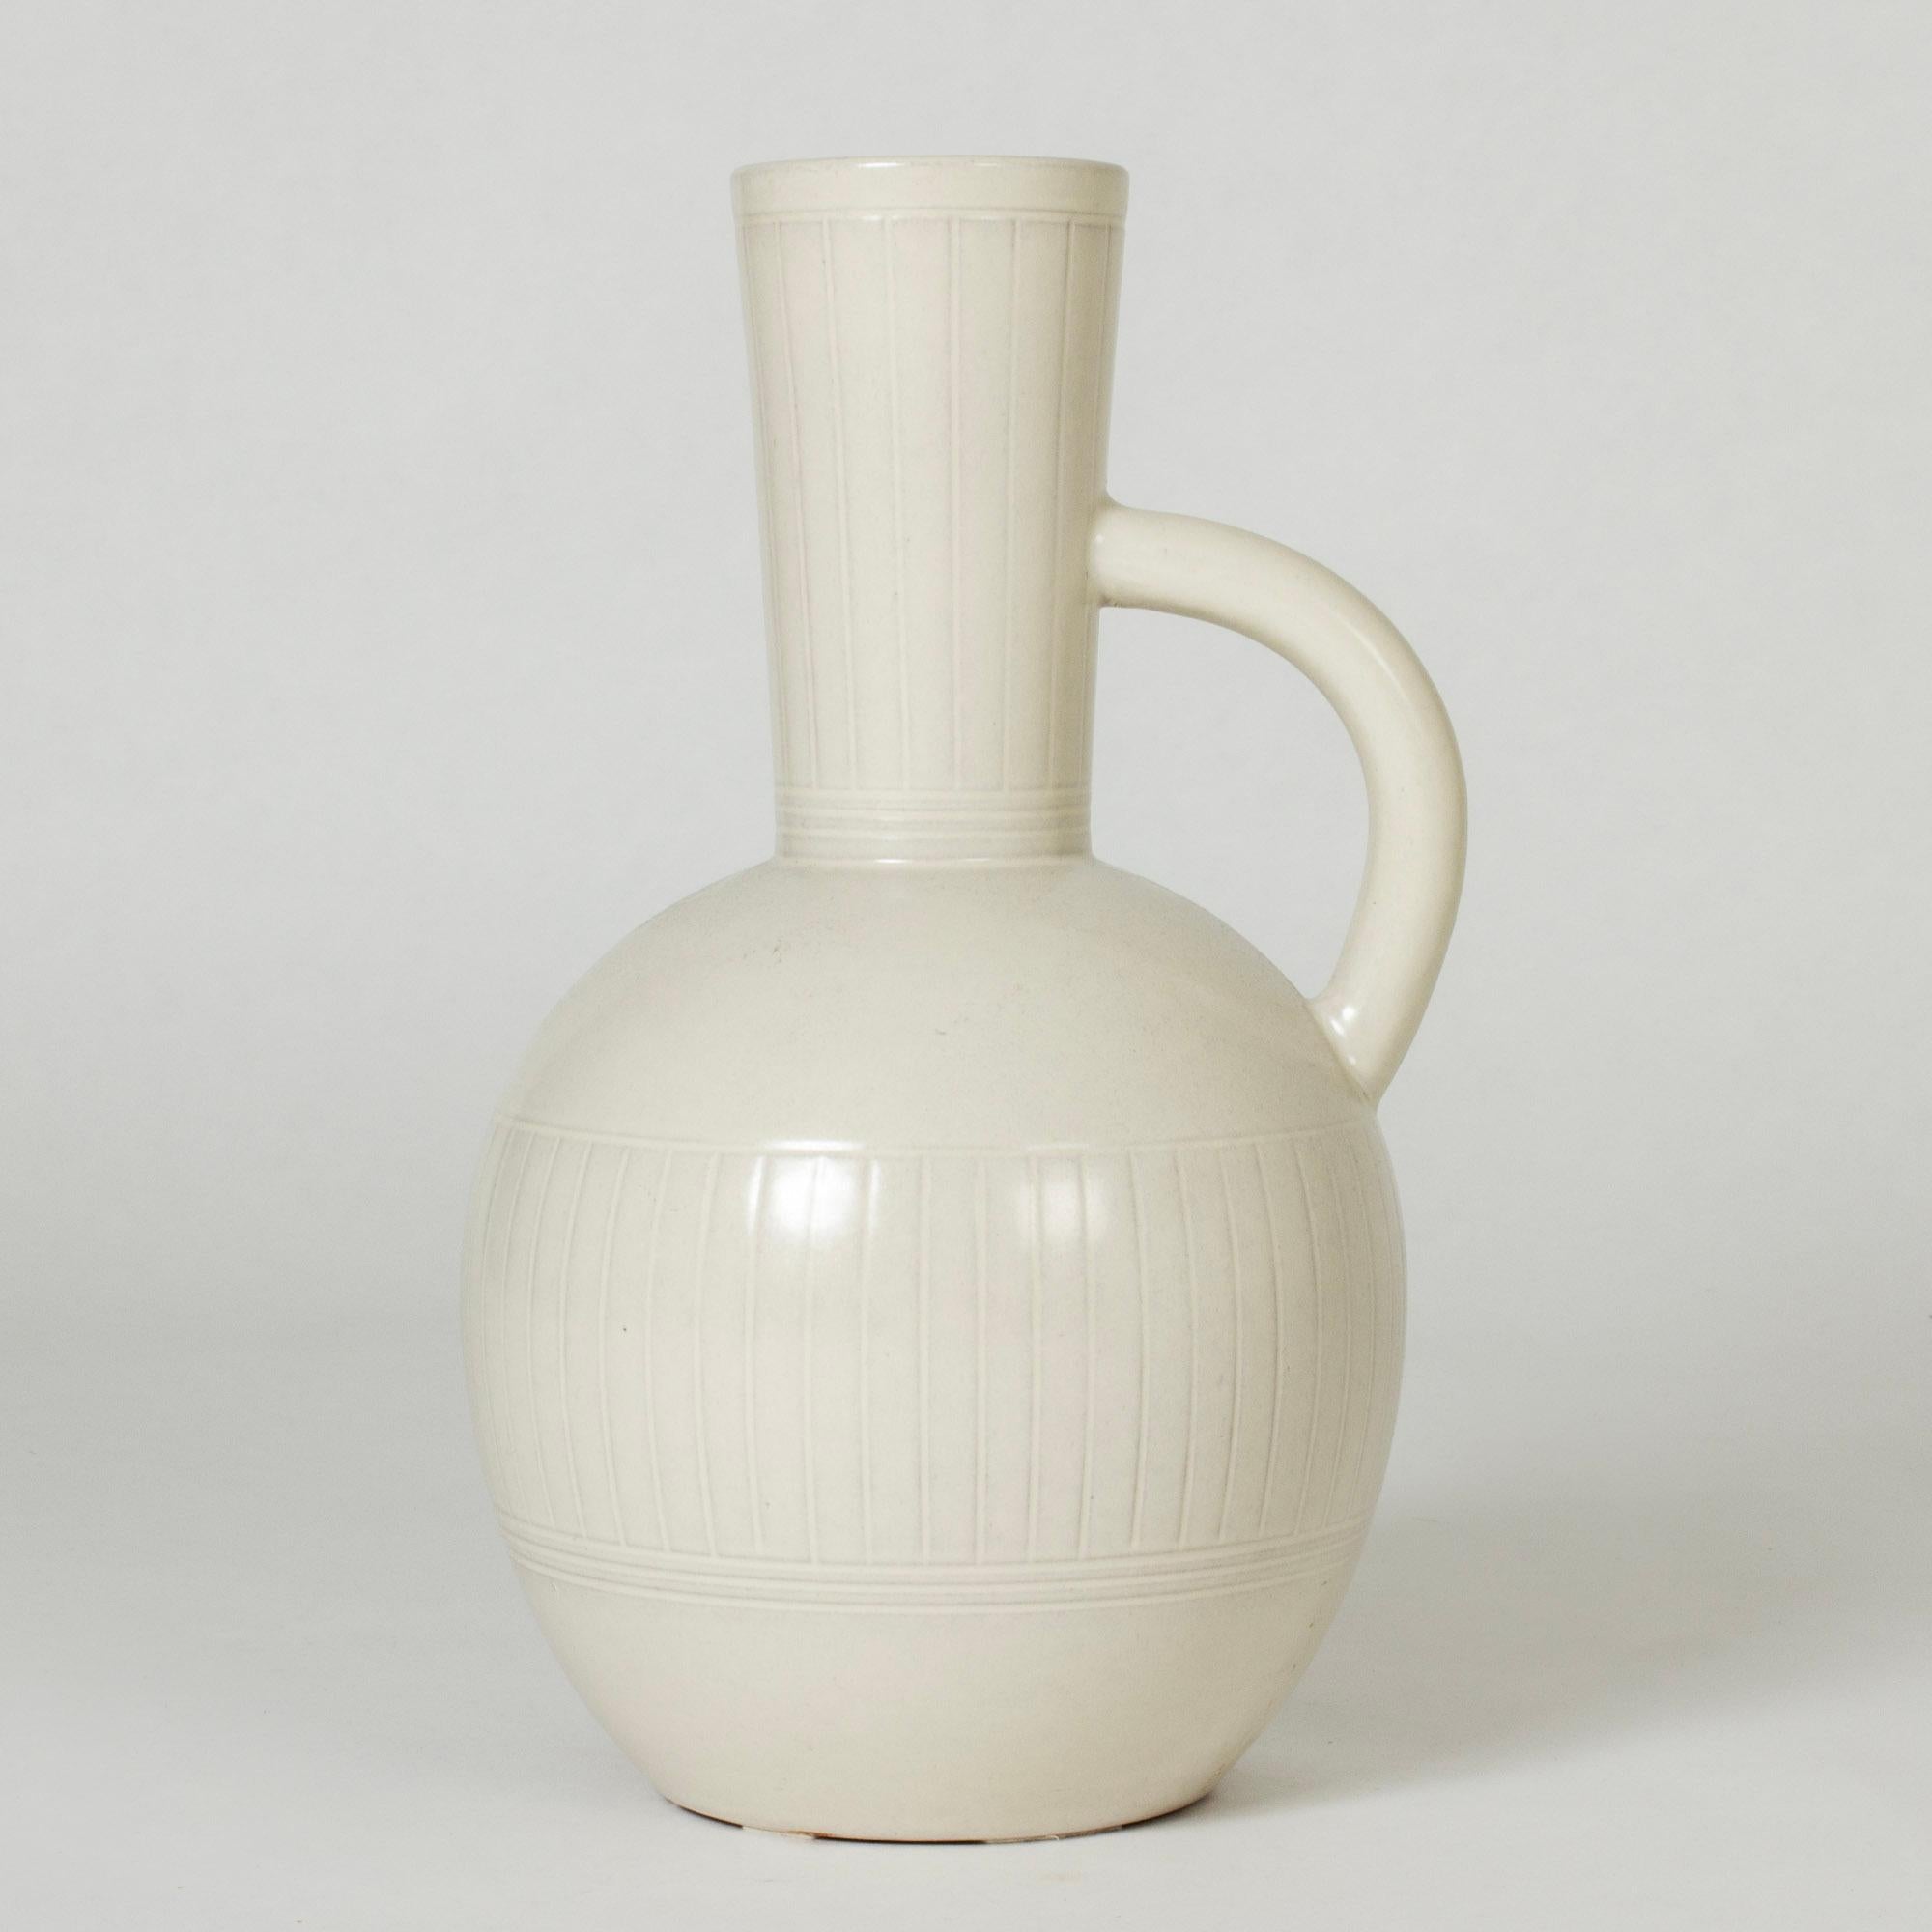 Large earthenware floor vase with a handle from Andersson & Johansson Höganäs. Generous, smooth form with eggshell white glaze.